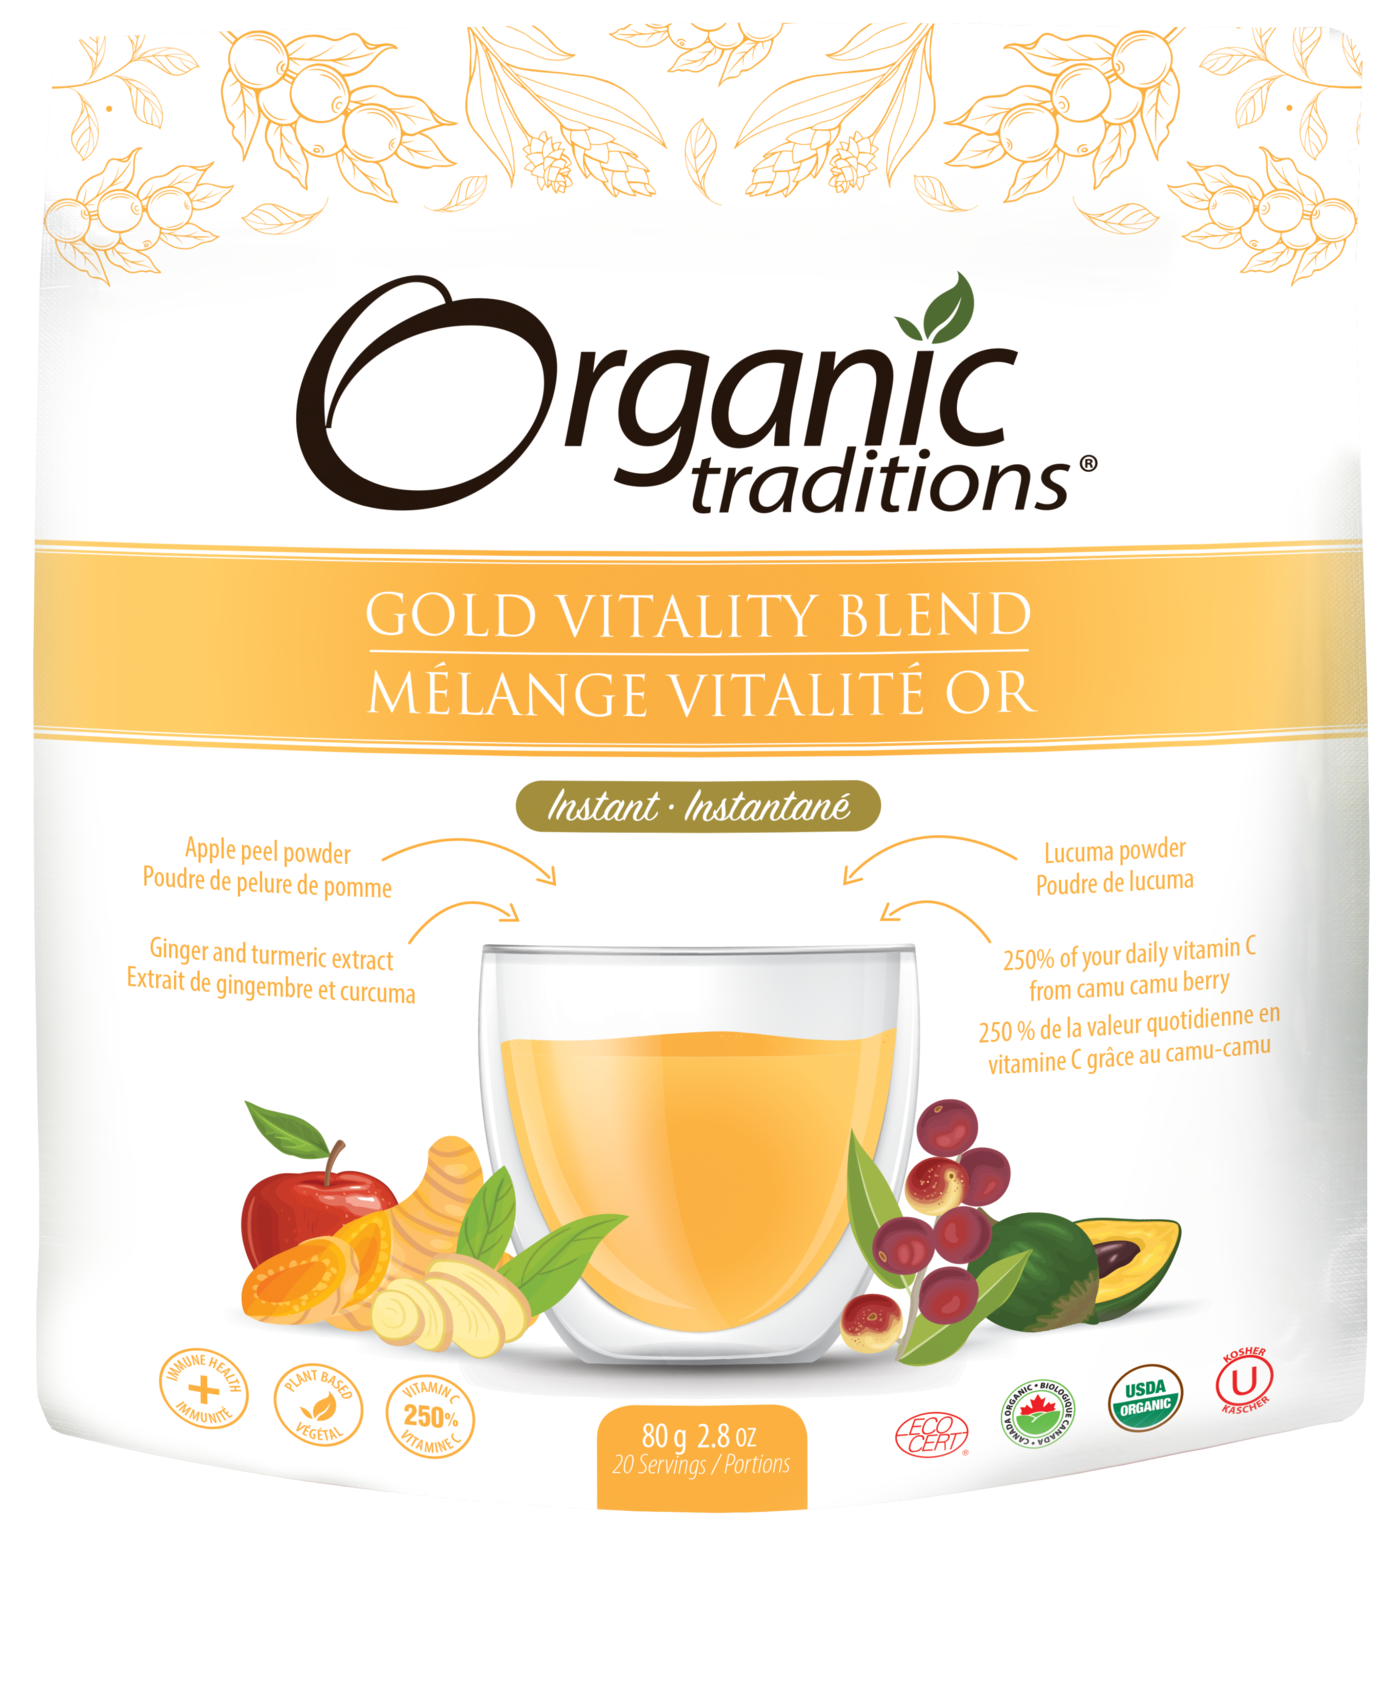 Organic Traditions Gold Vitality Blend